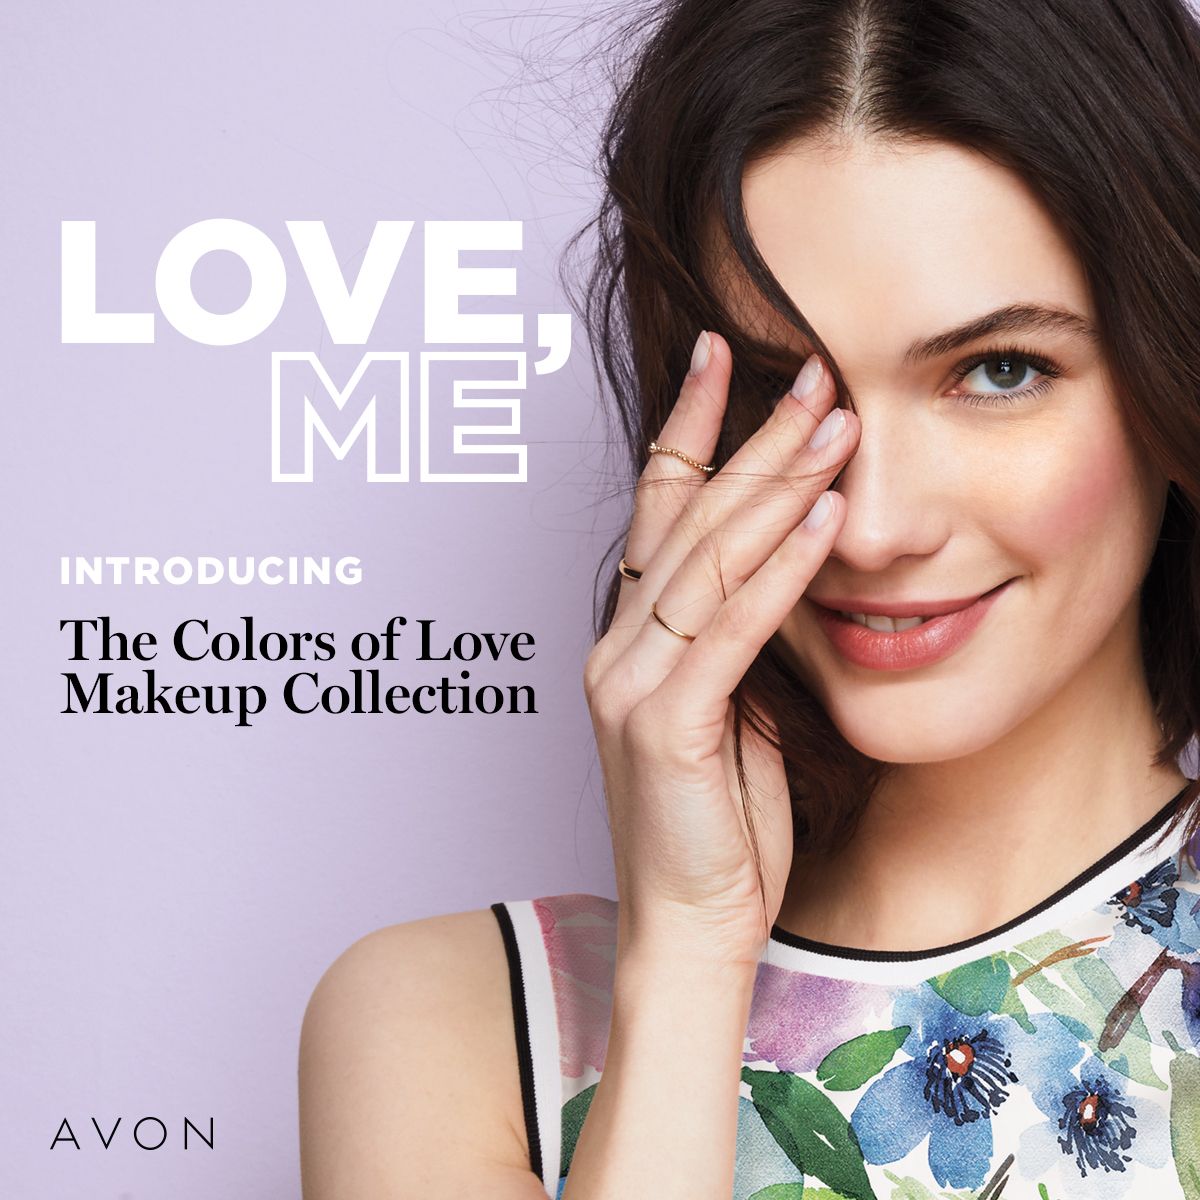 Color. Care. All the things you love about makeup and more